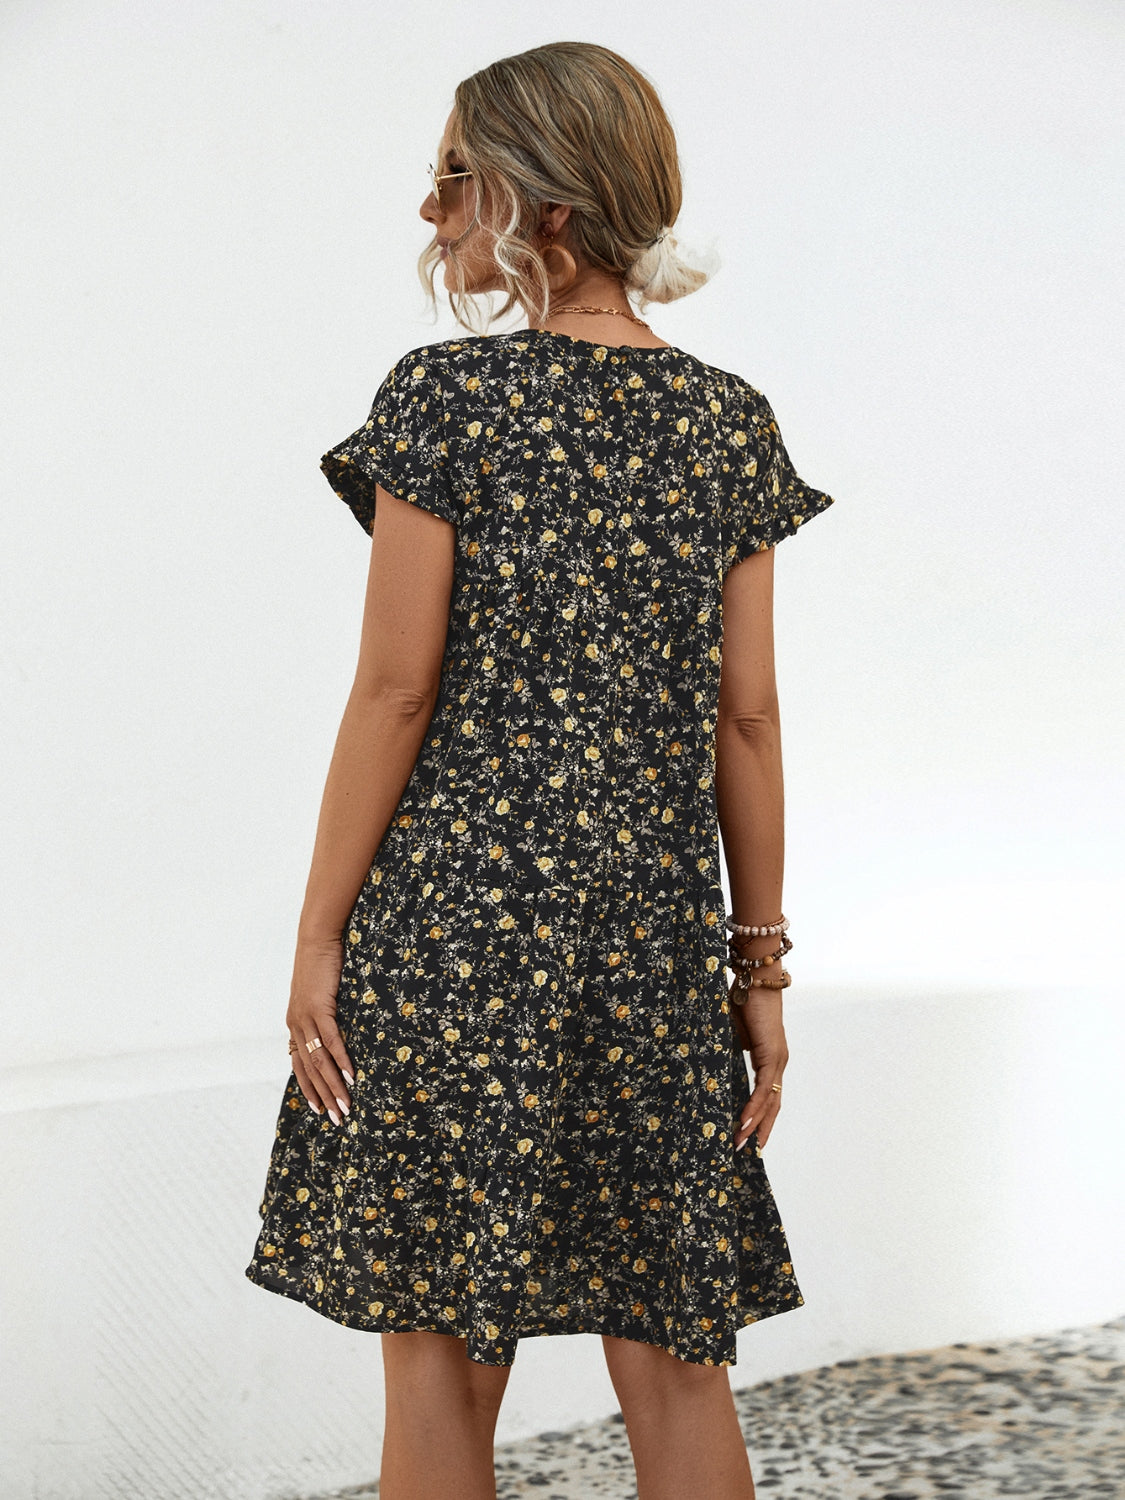 Summer's charm in a dress! Discover our Floral Tiered Dress, perfect for day/night elegance. Available in black and sand.